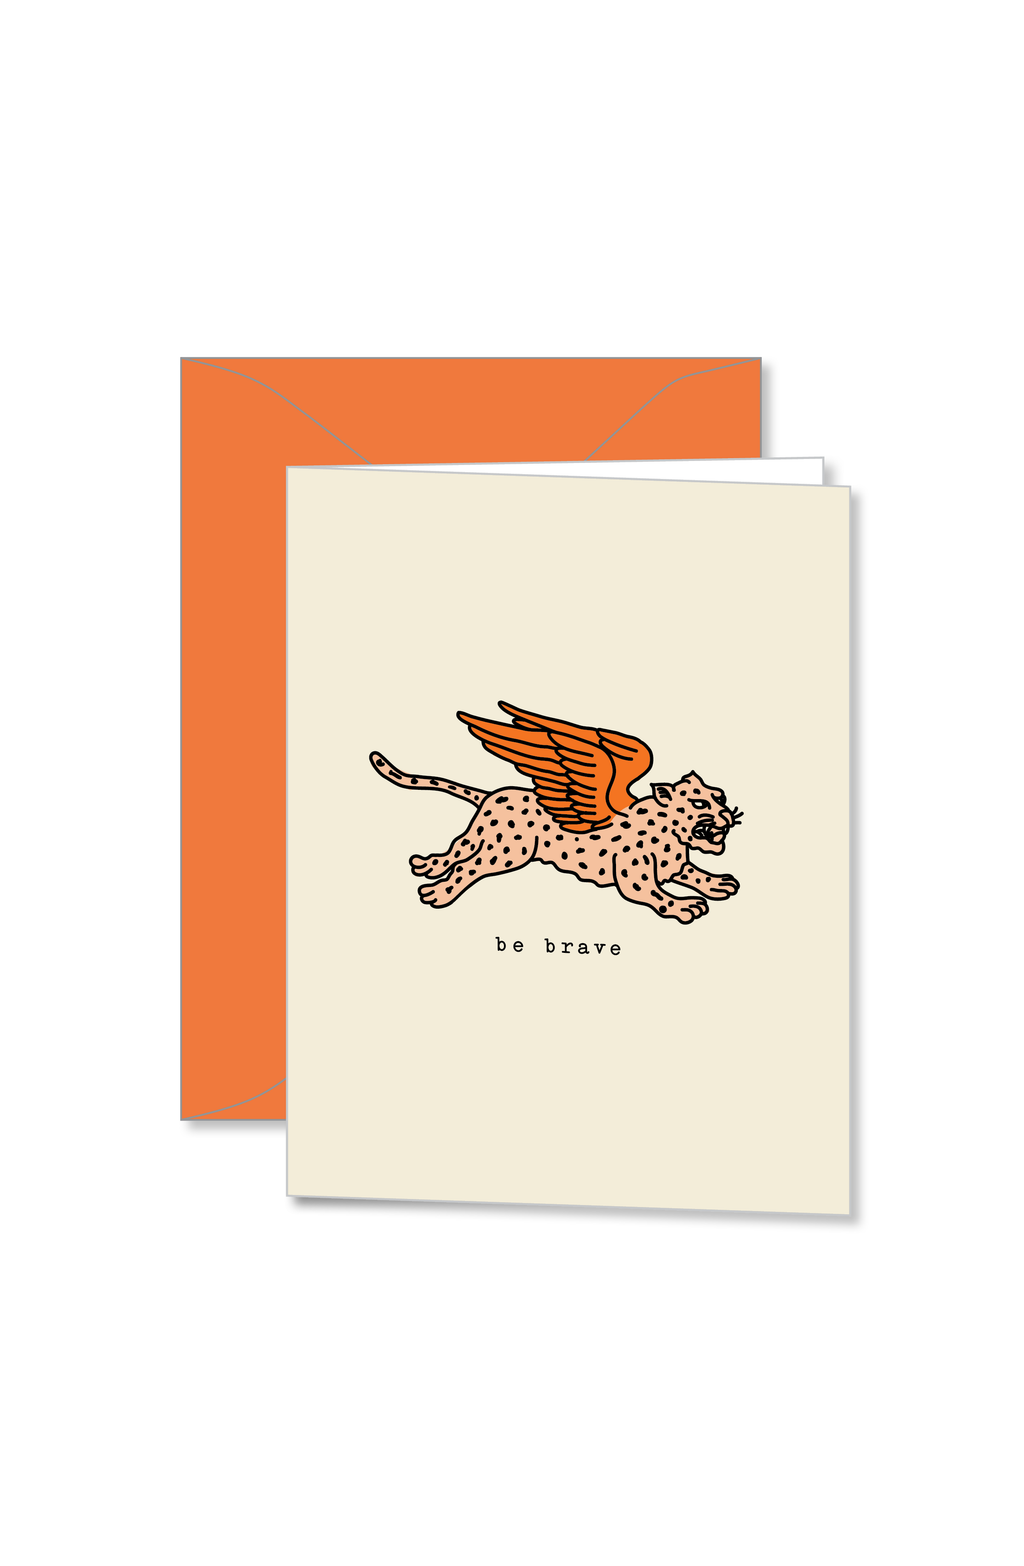 Cream notecard with flying cheetah design and be brave text design by Ramble and Co. | you can shop now at  shop.rambleandcompany.com or visit our storefront in downtown Wichita Falls, Texas || small batch + hand printed tees | home goods | paper goods | gifts + more